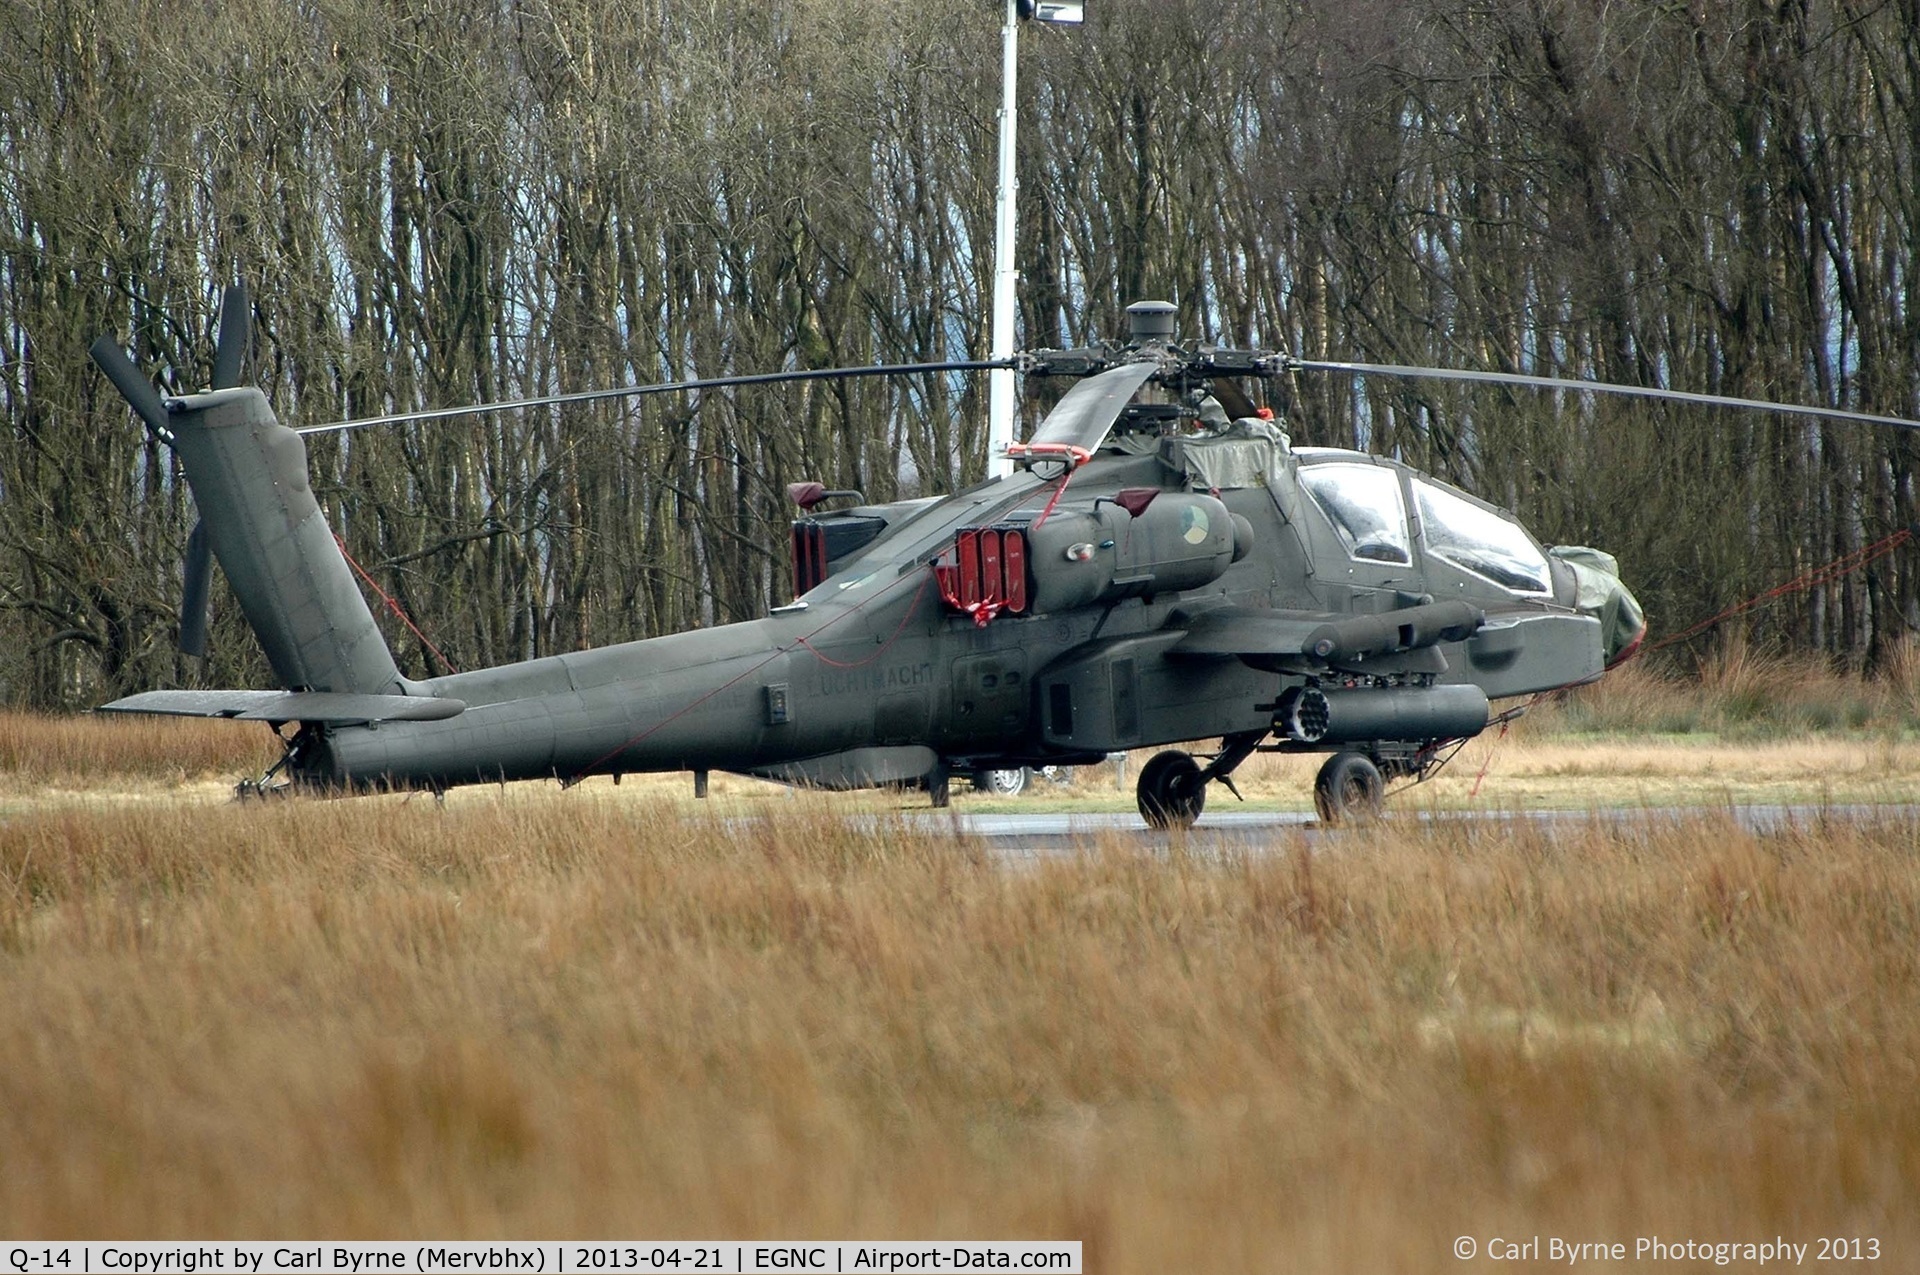 Q-14, 1998 Boeing AH-64D Apache C/N DN014, Here for the annual exercise.